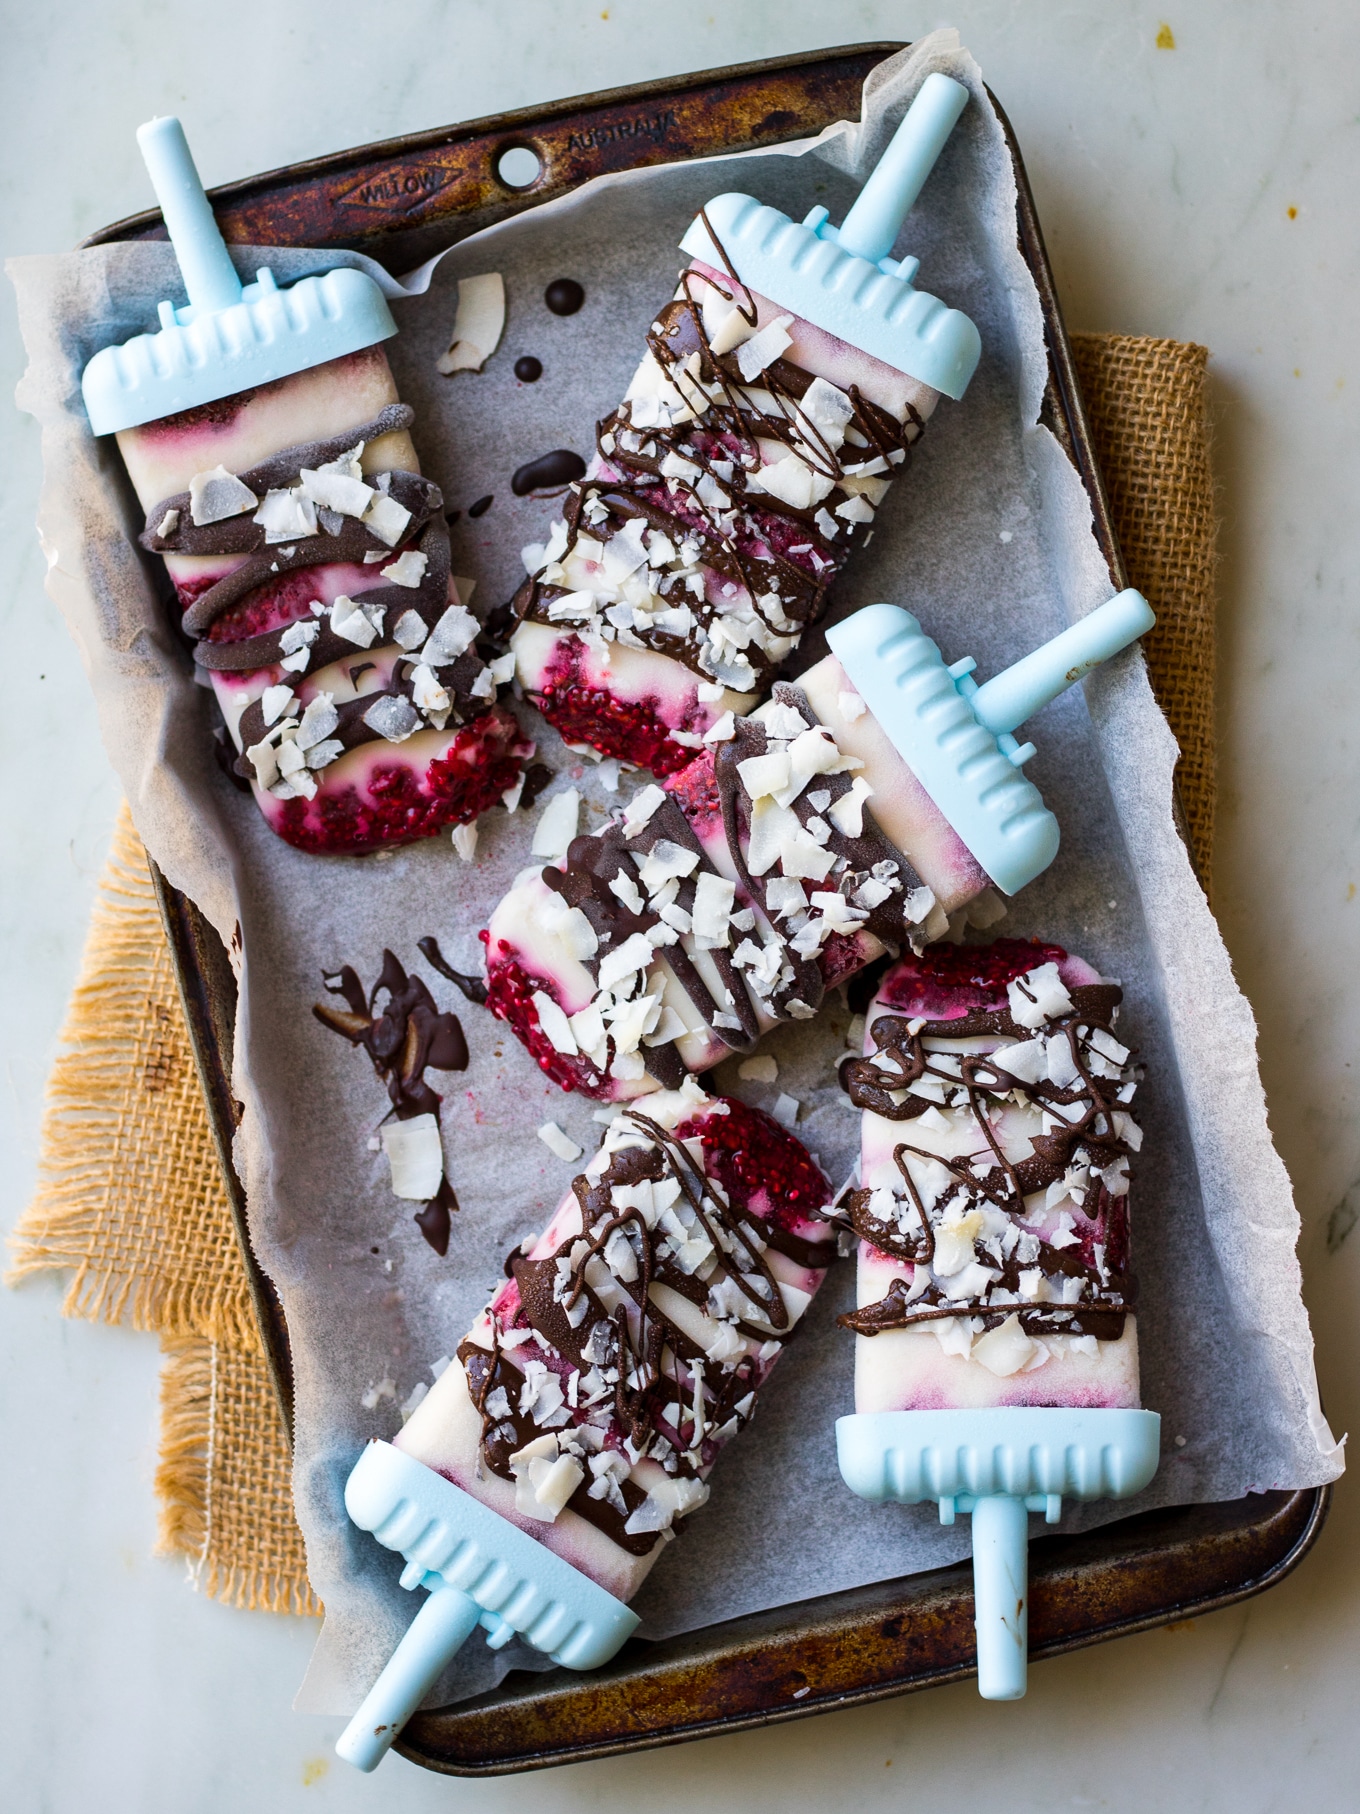 Creamy coconut #lamington popsicles are a healthy vegan frozen dessert, made with coconut yoghurt, raspberry chia jam and dark chocolate. Easy to make! #dairyfree #popsicles #vegan